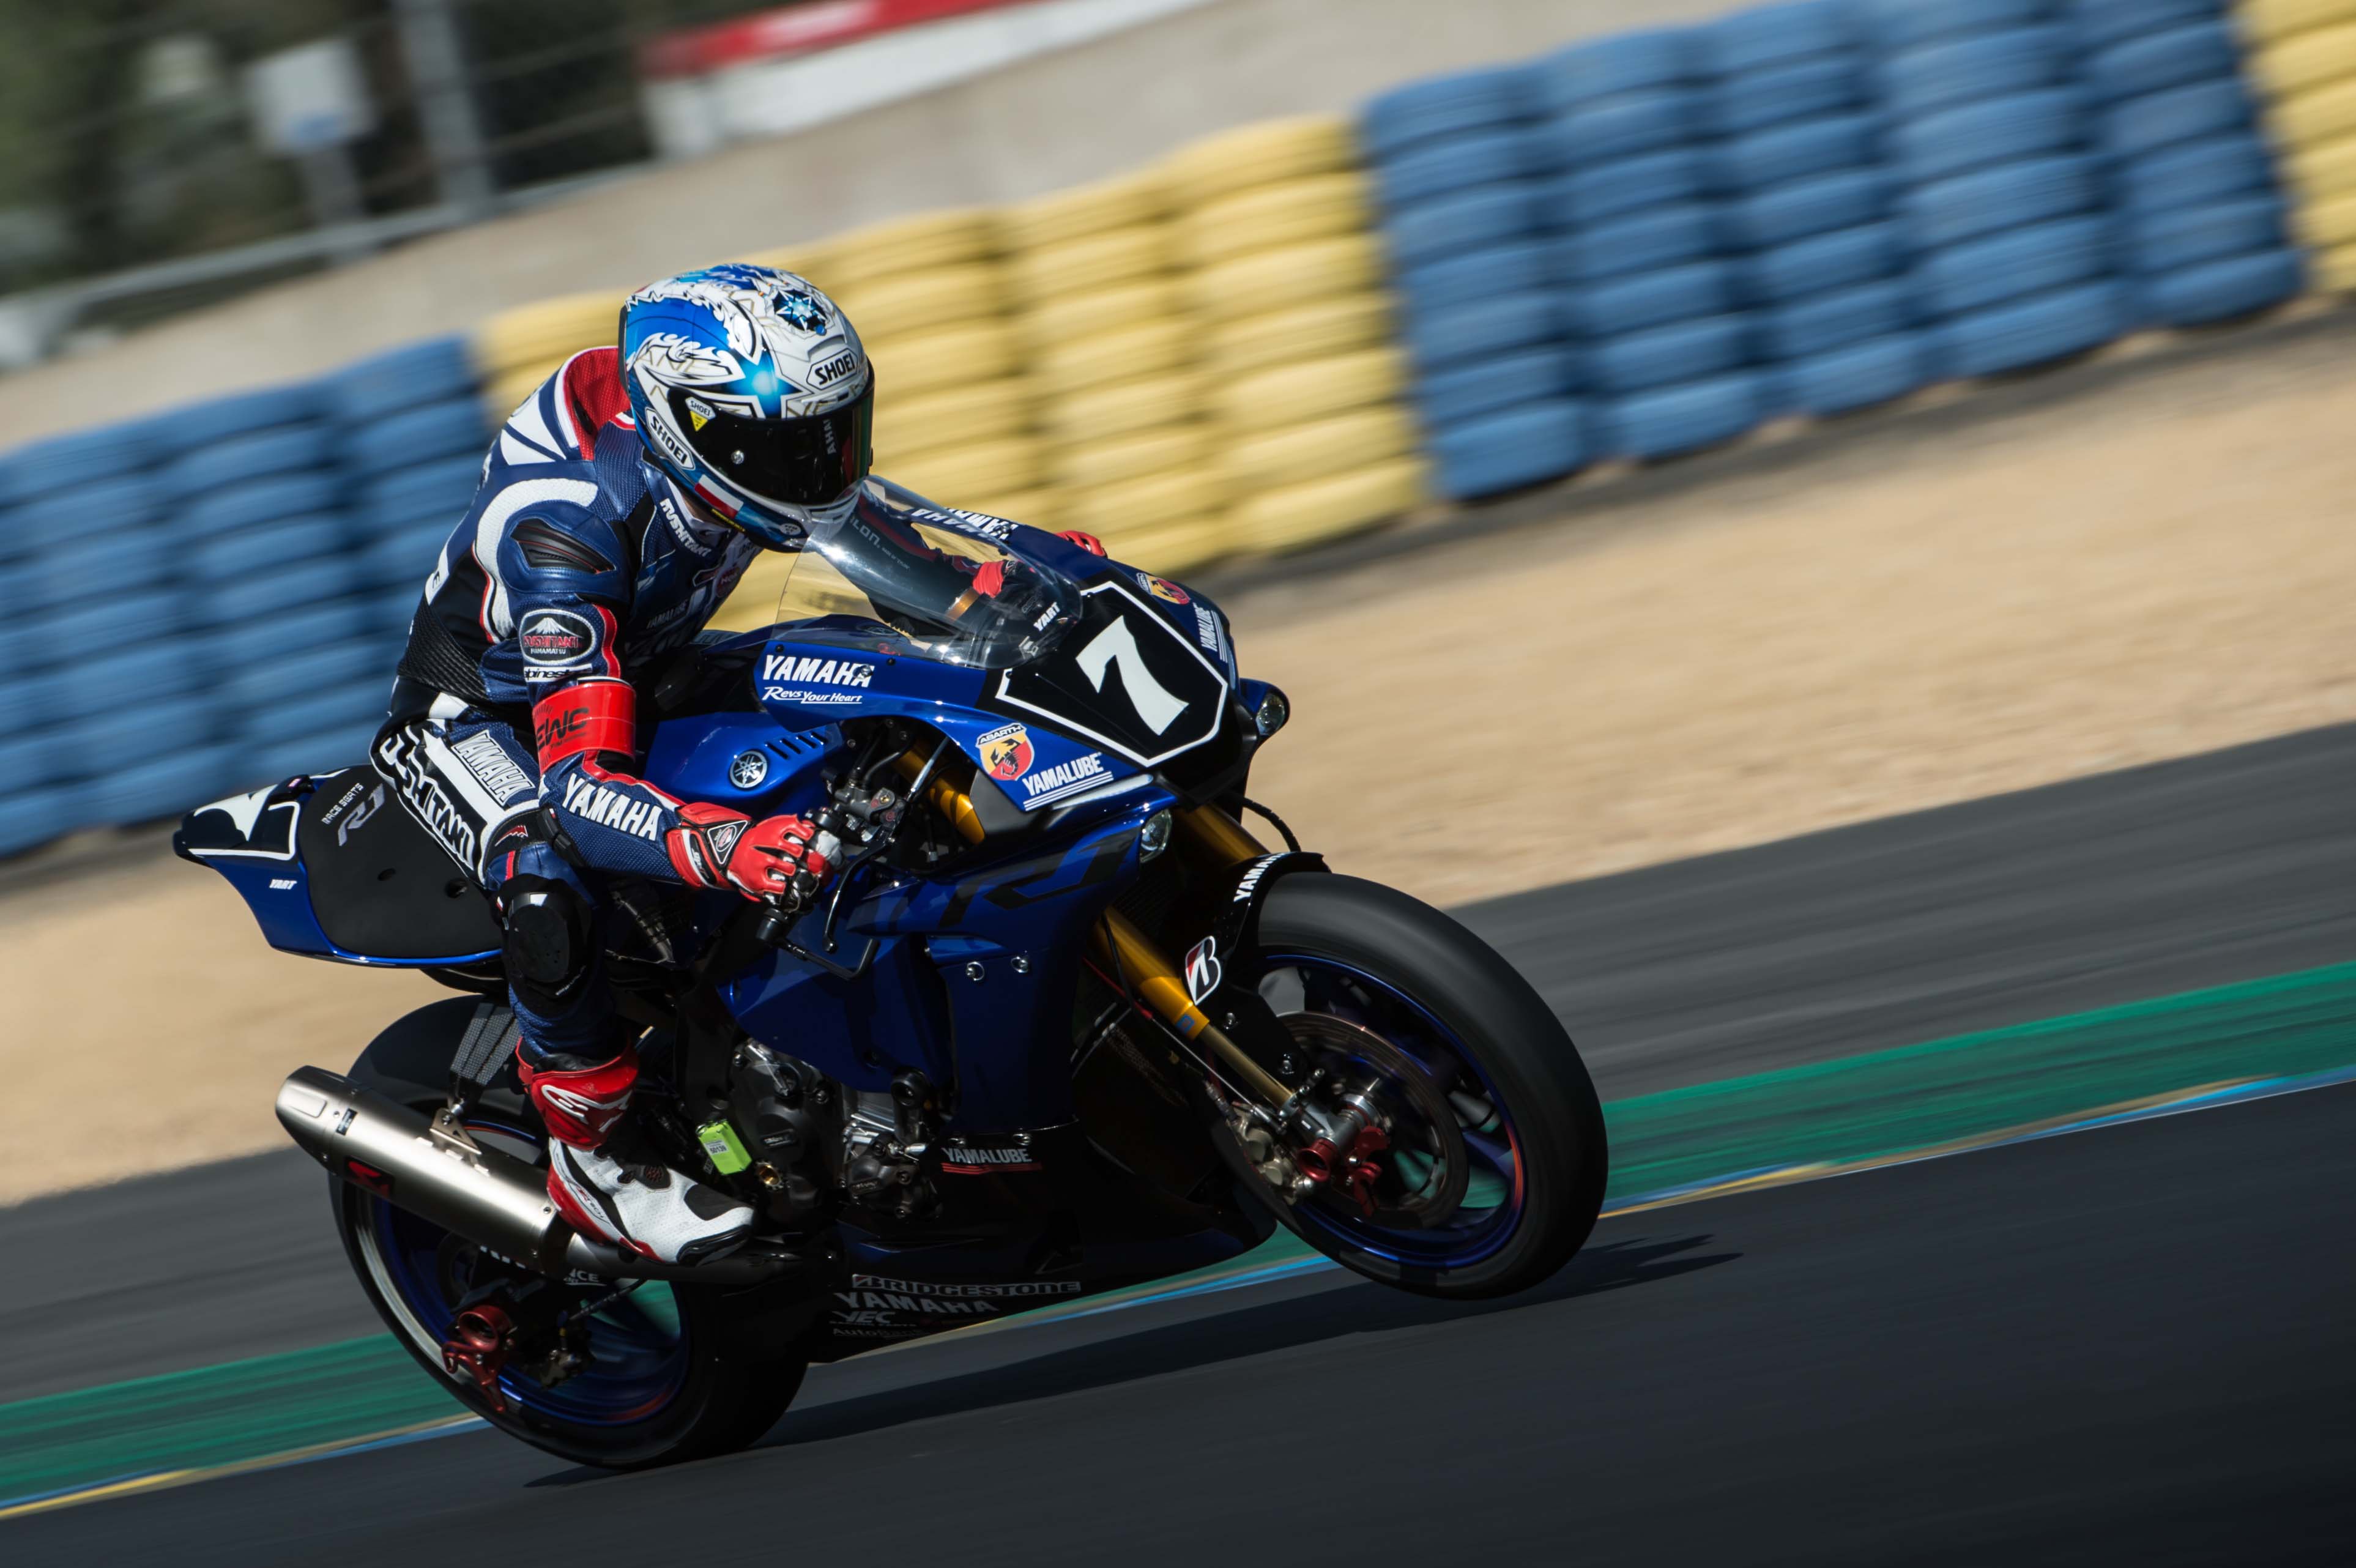 YART Yamaha trio to start second from the grid in 24 Hours of Le Mans